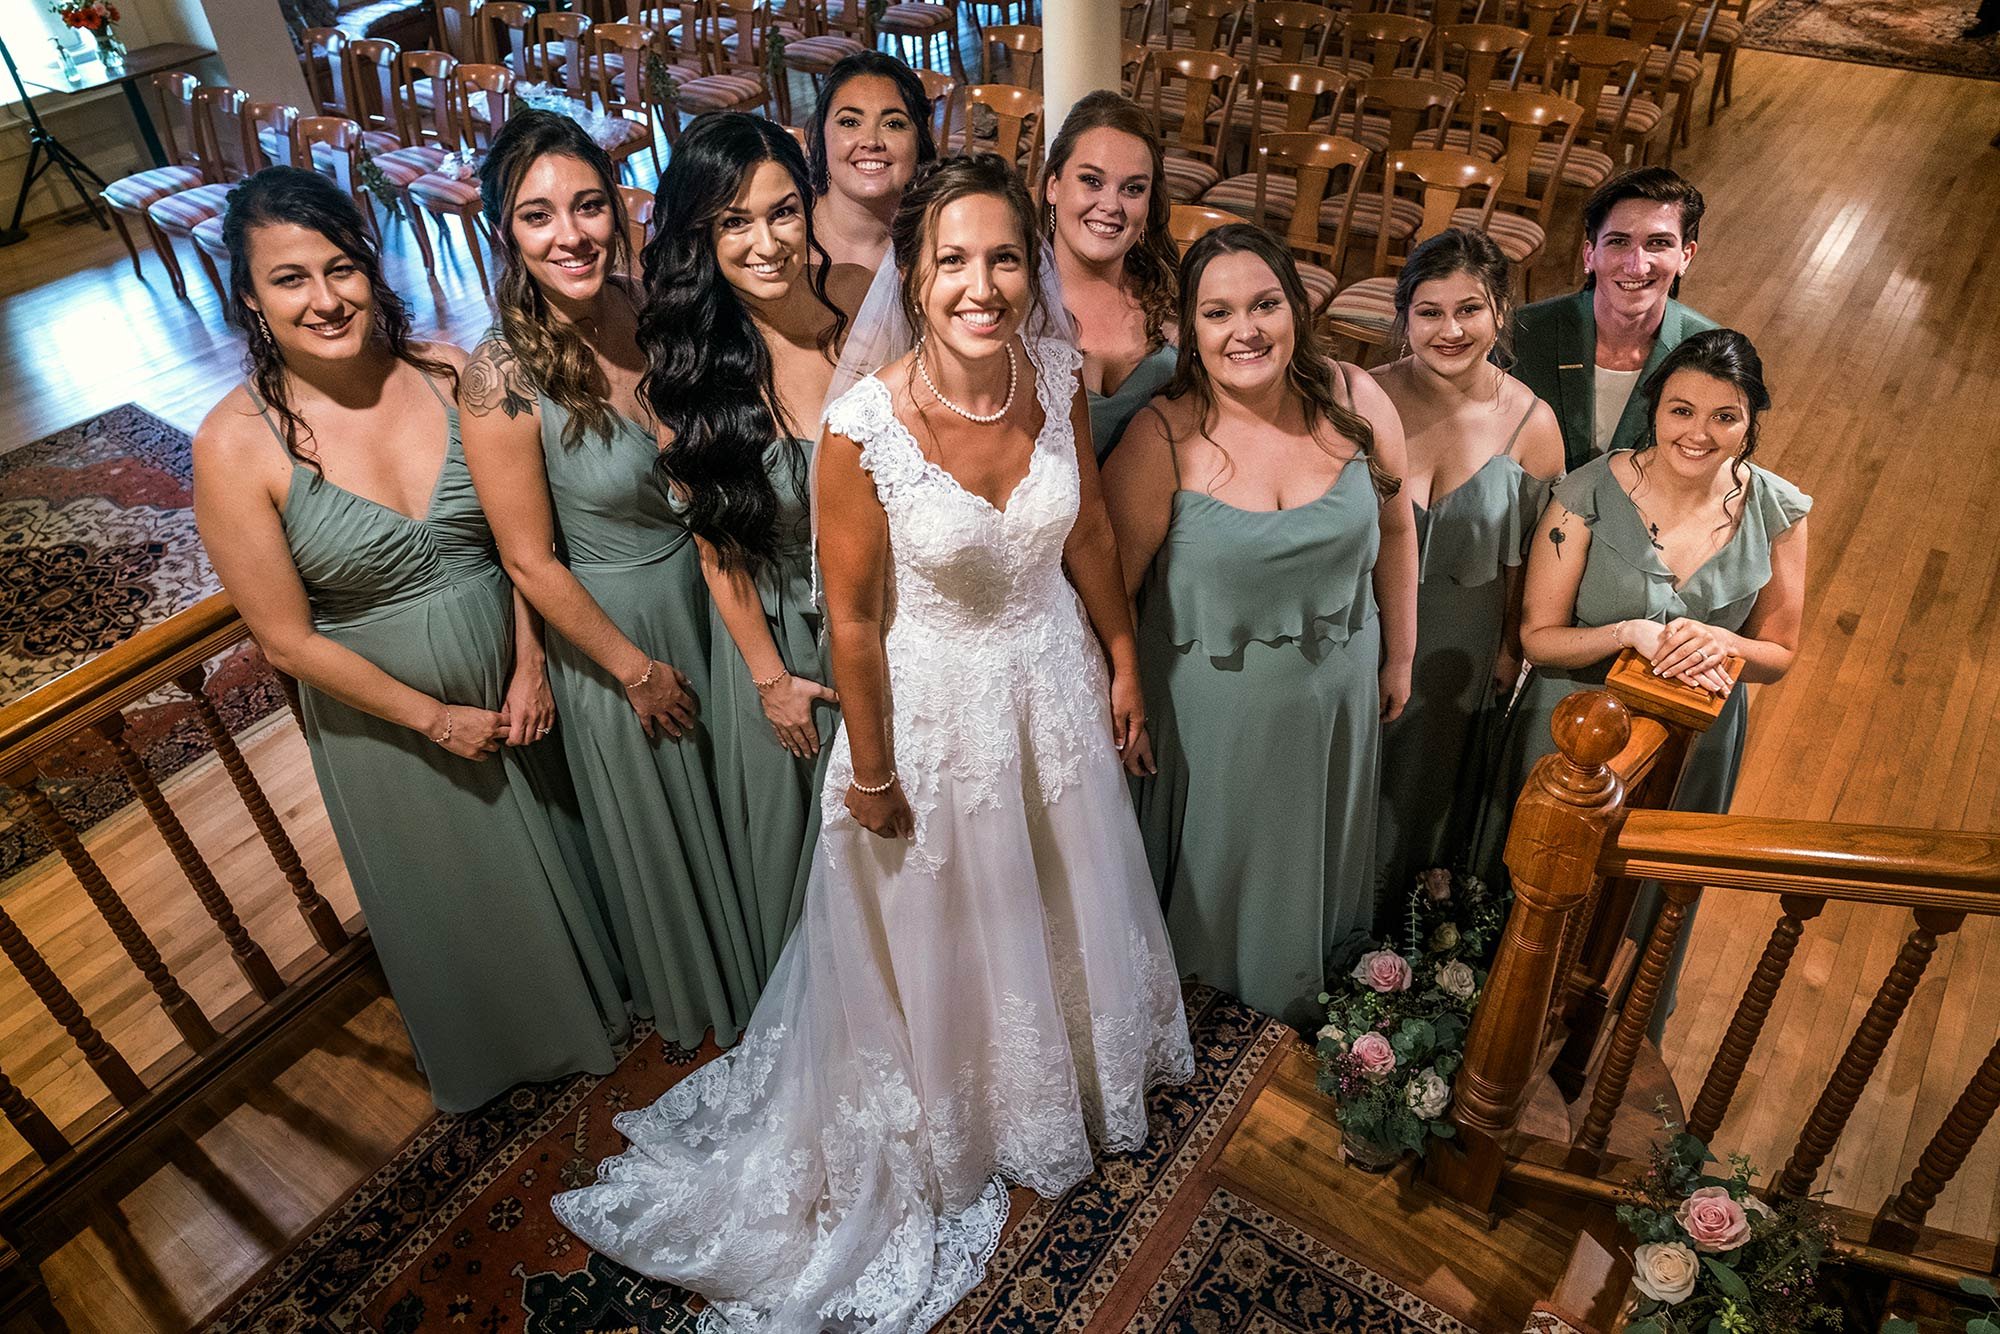 Bride and bridesmaid's at The Wentworth Inn | Robert Ortiz Photography  (Copy)